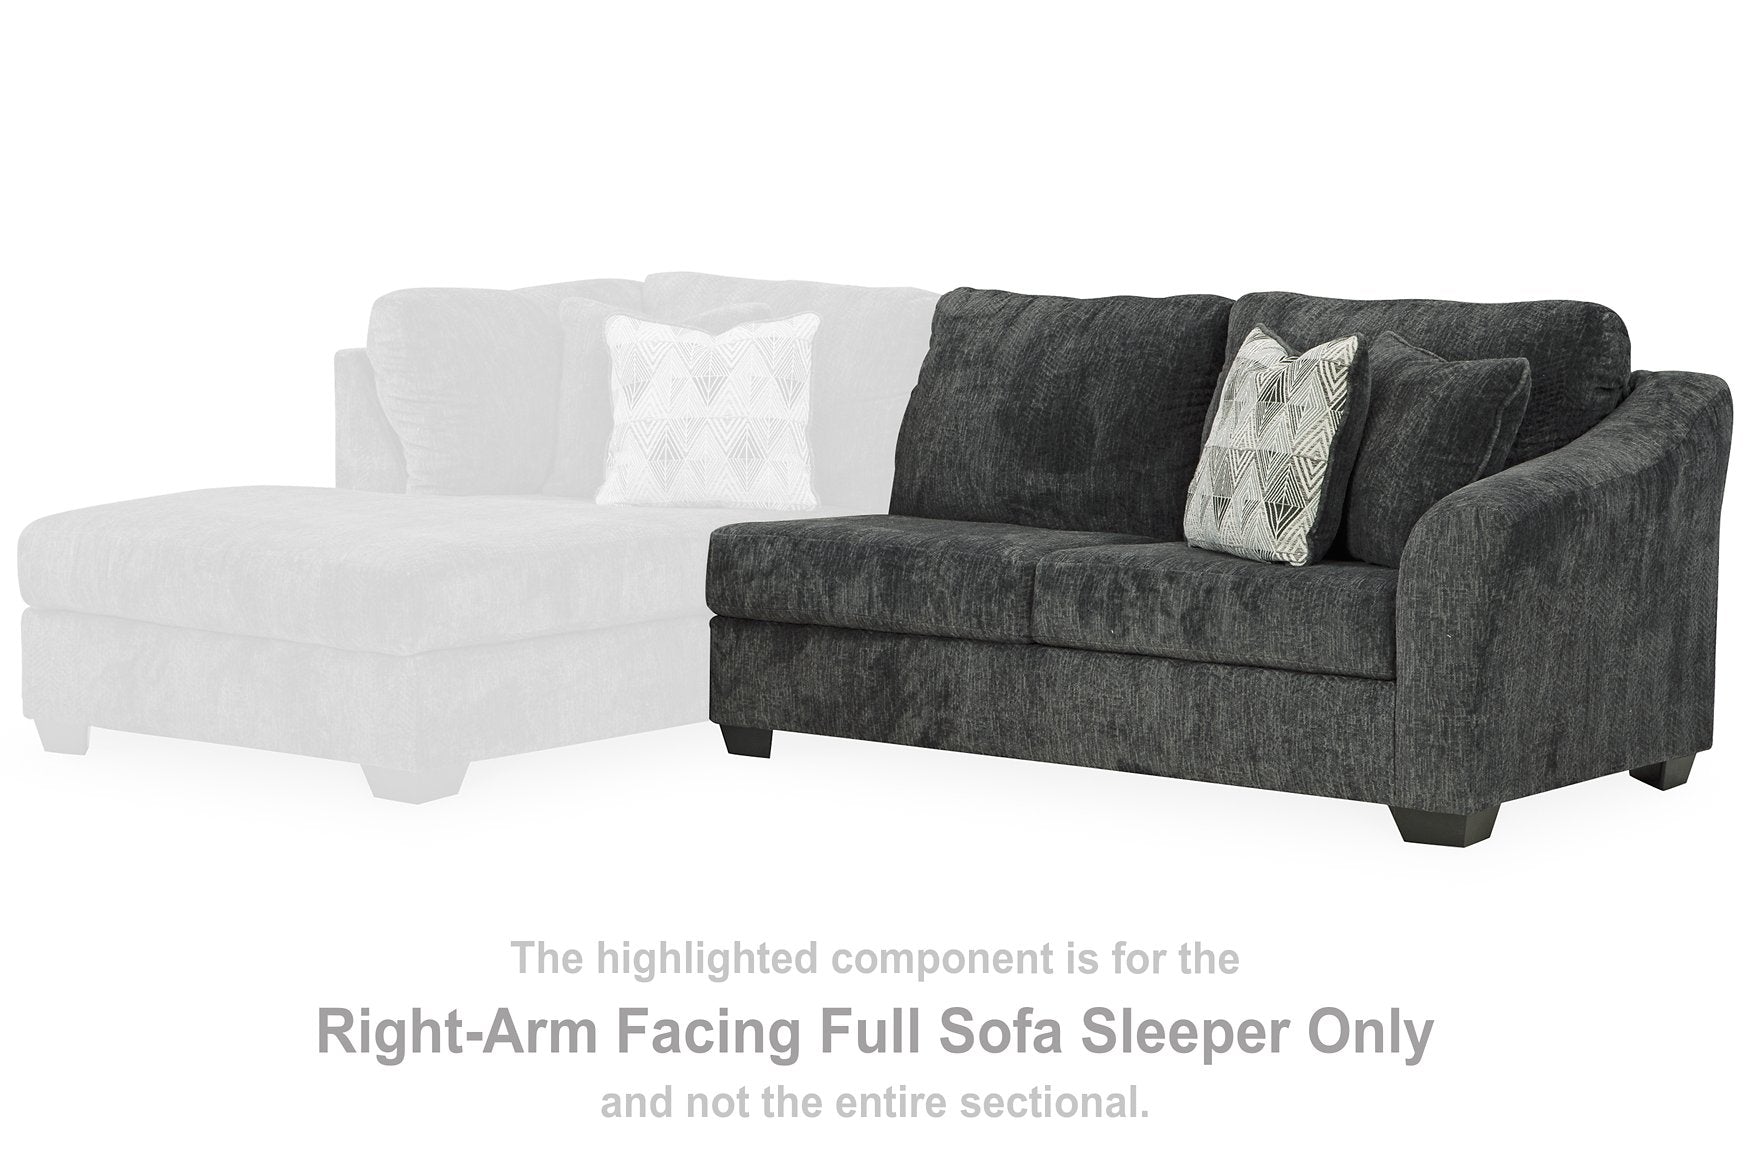 Biddeford 2-Piece Sleeper Sectional with Chaise Biddeford 2-Piece Sleeper Sectional with Chaise Half Price Furniture